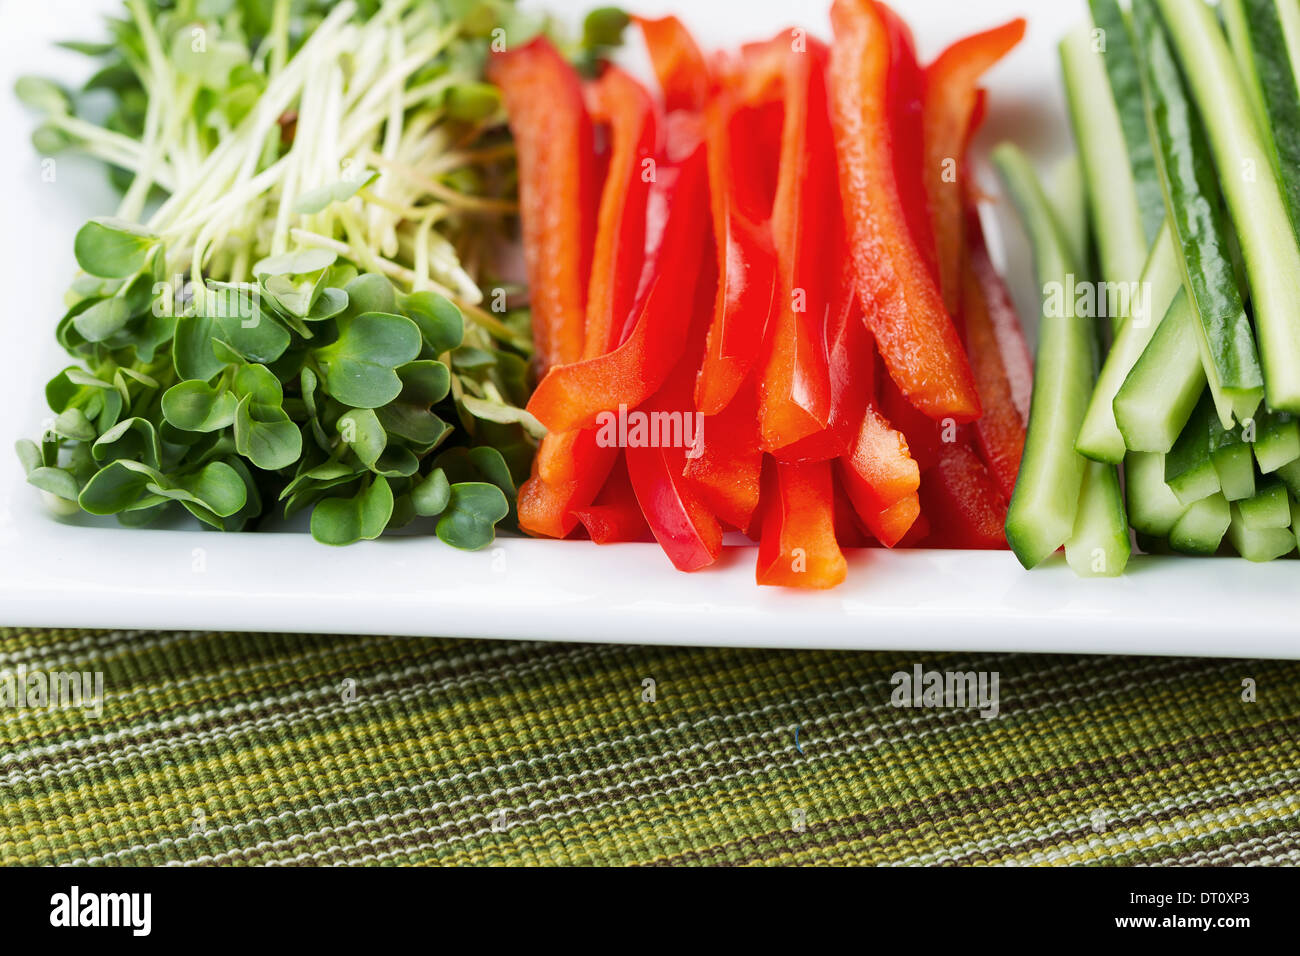 Horizontal closeup photo of freshly sliced red peppers, placed in white plate, along with sliced cucumbers, and daikon radish Stock Photo